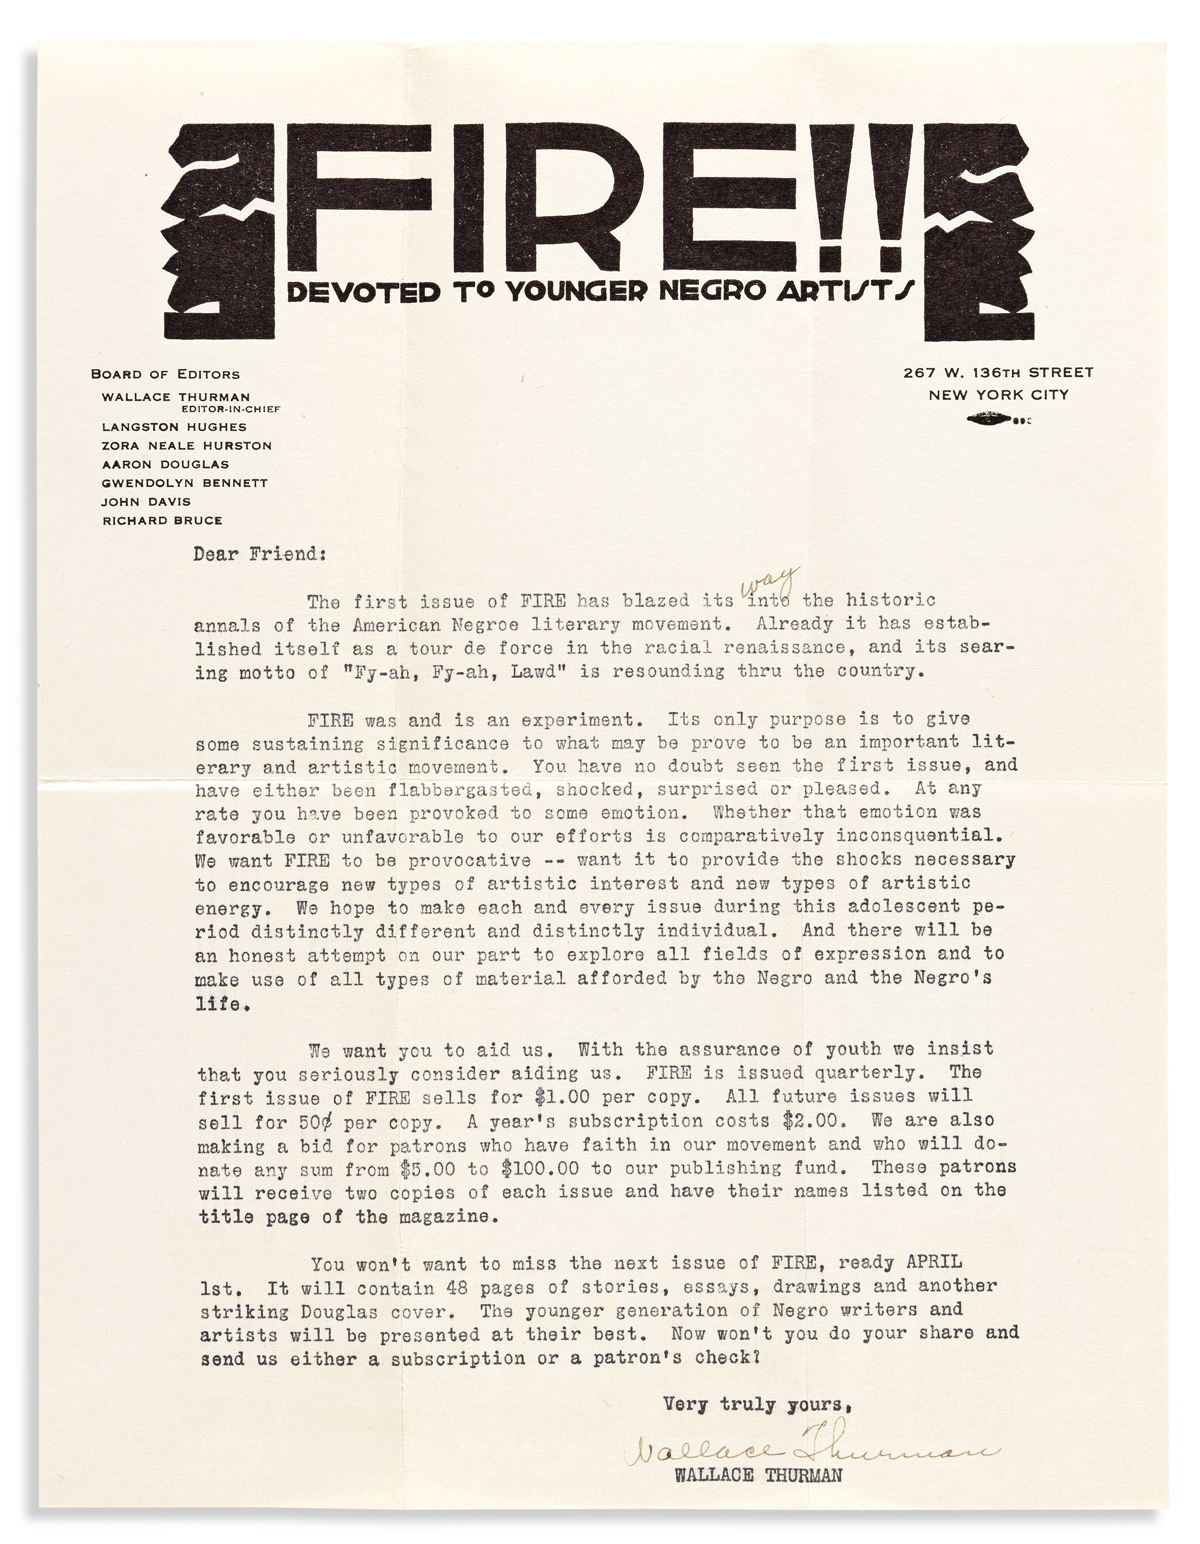 (LITERATURE.) Wallace Thurman. Letter promoting (and defending) his literary journal Fire!!